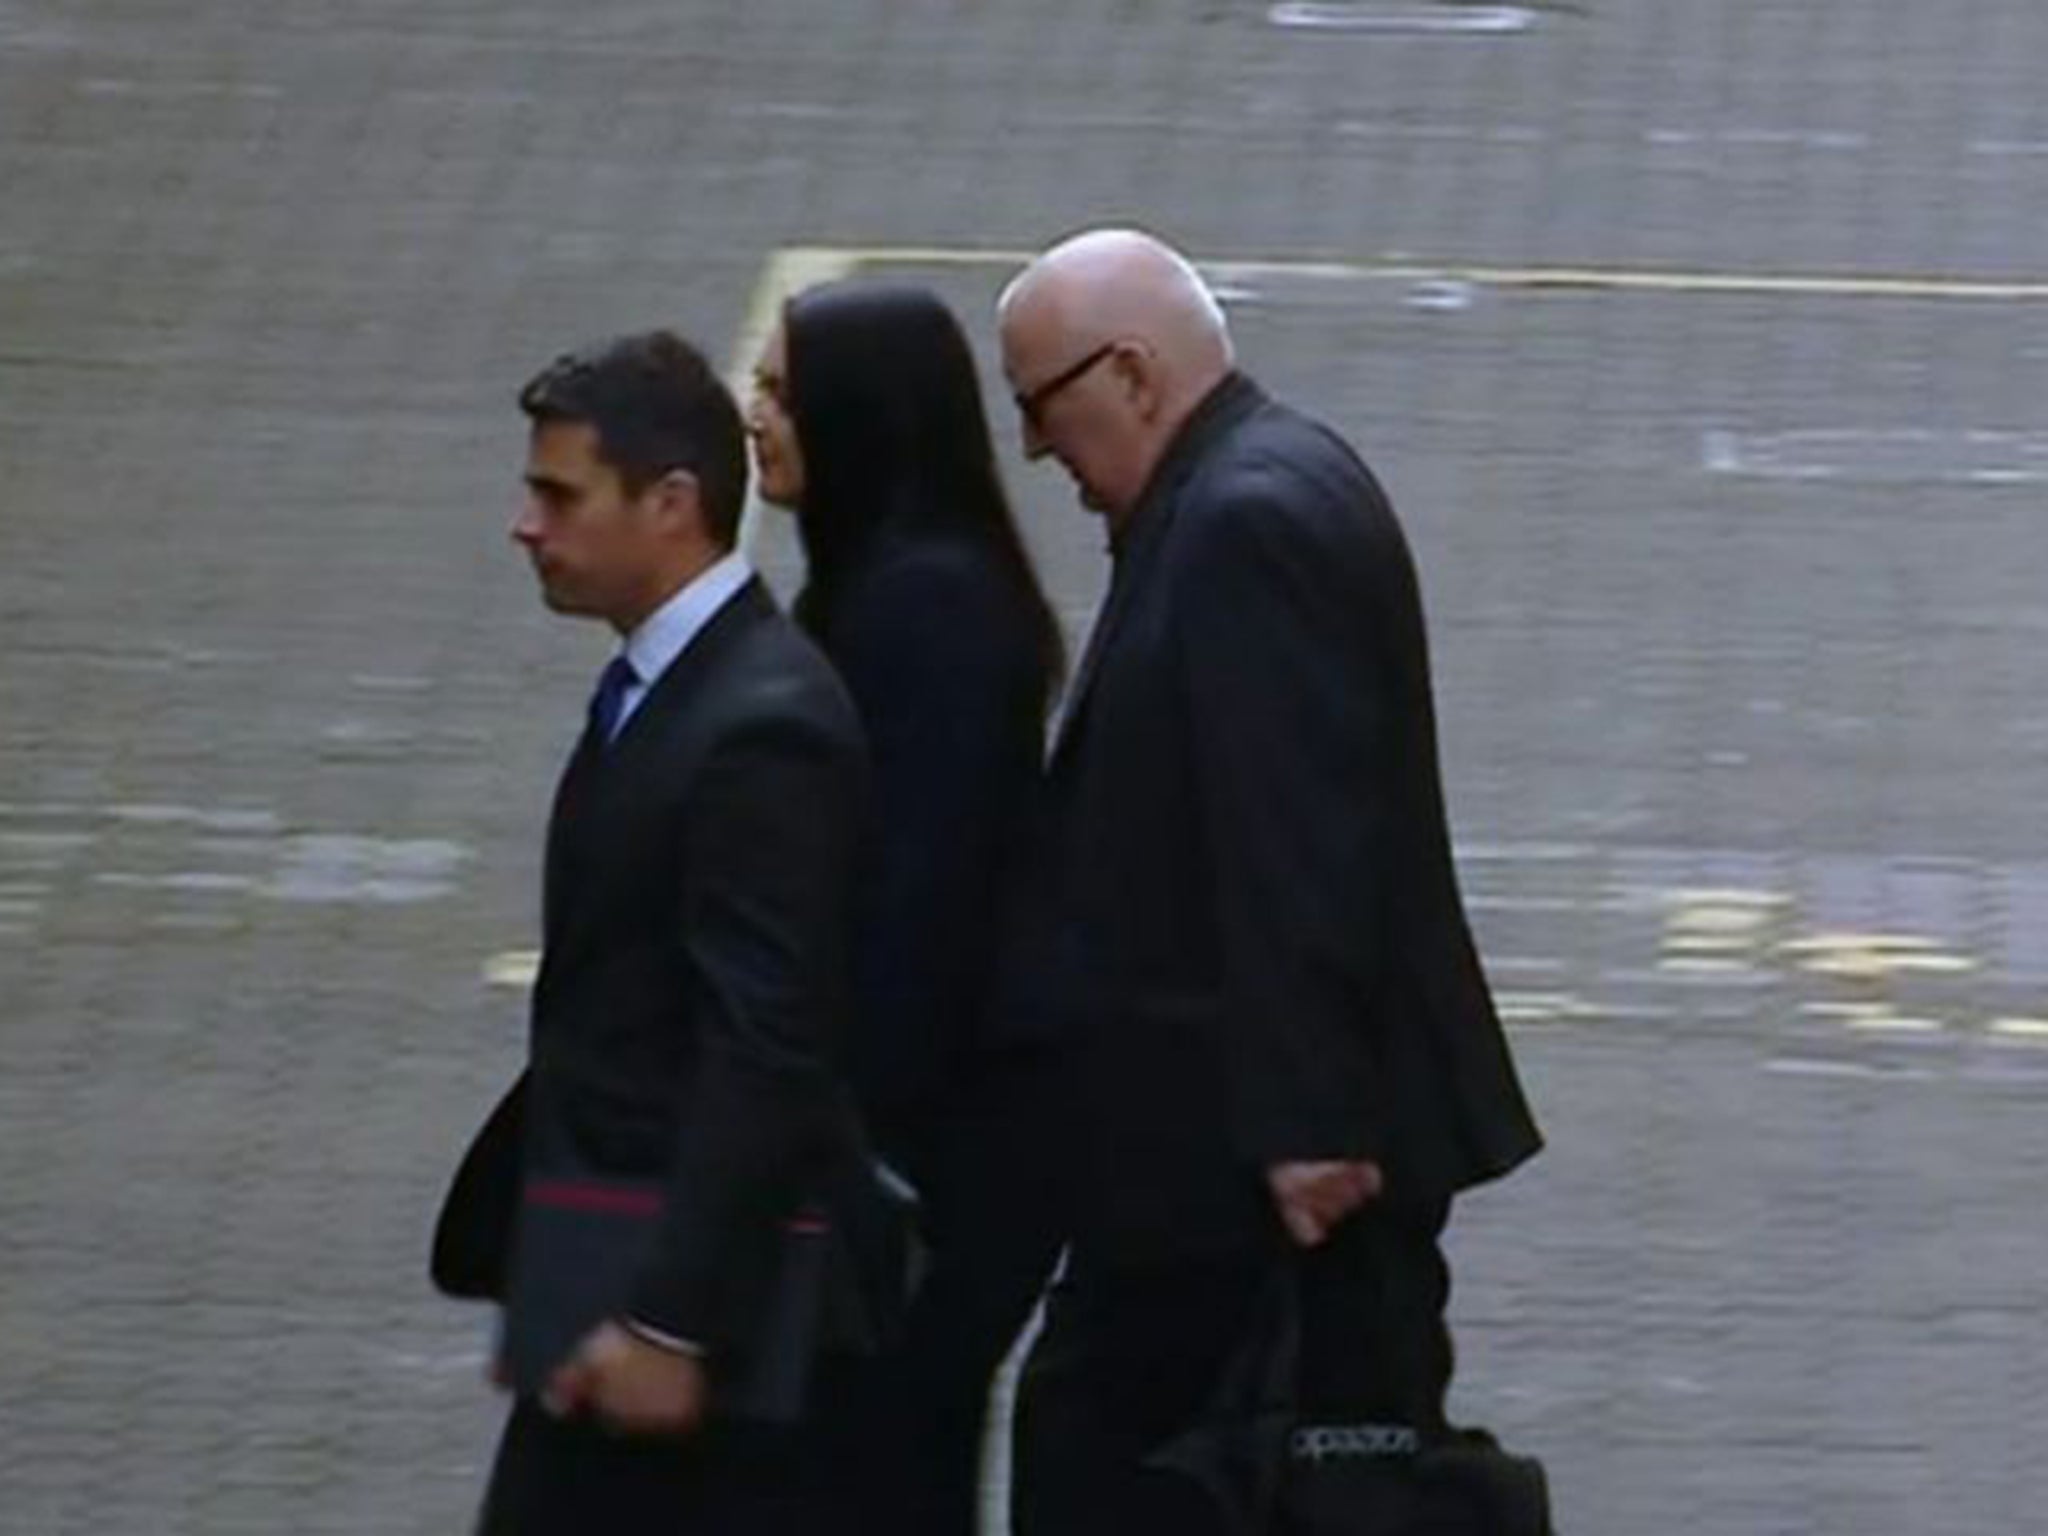 Harry Clarks, right, leaving court. The 58yr old was unconscious when his bin lorry veered out of control on 22 December 2014, killing six people